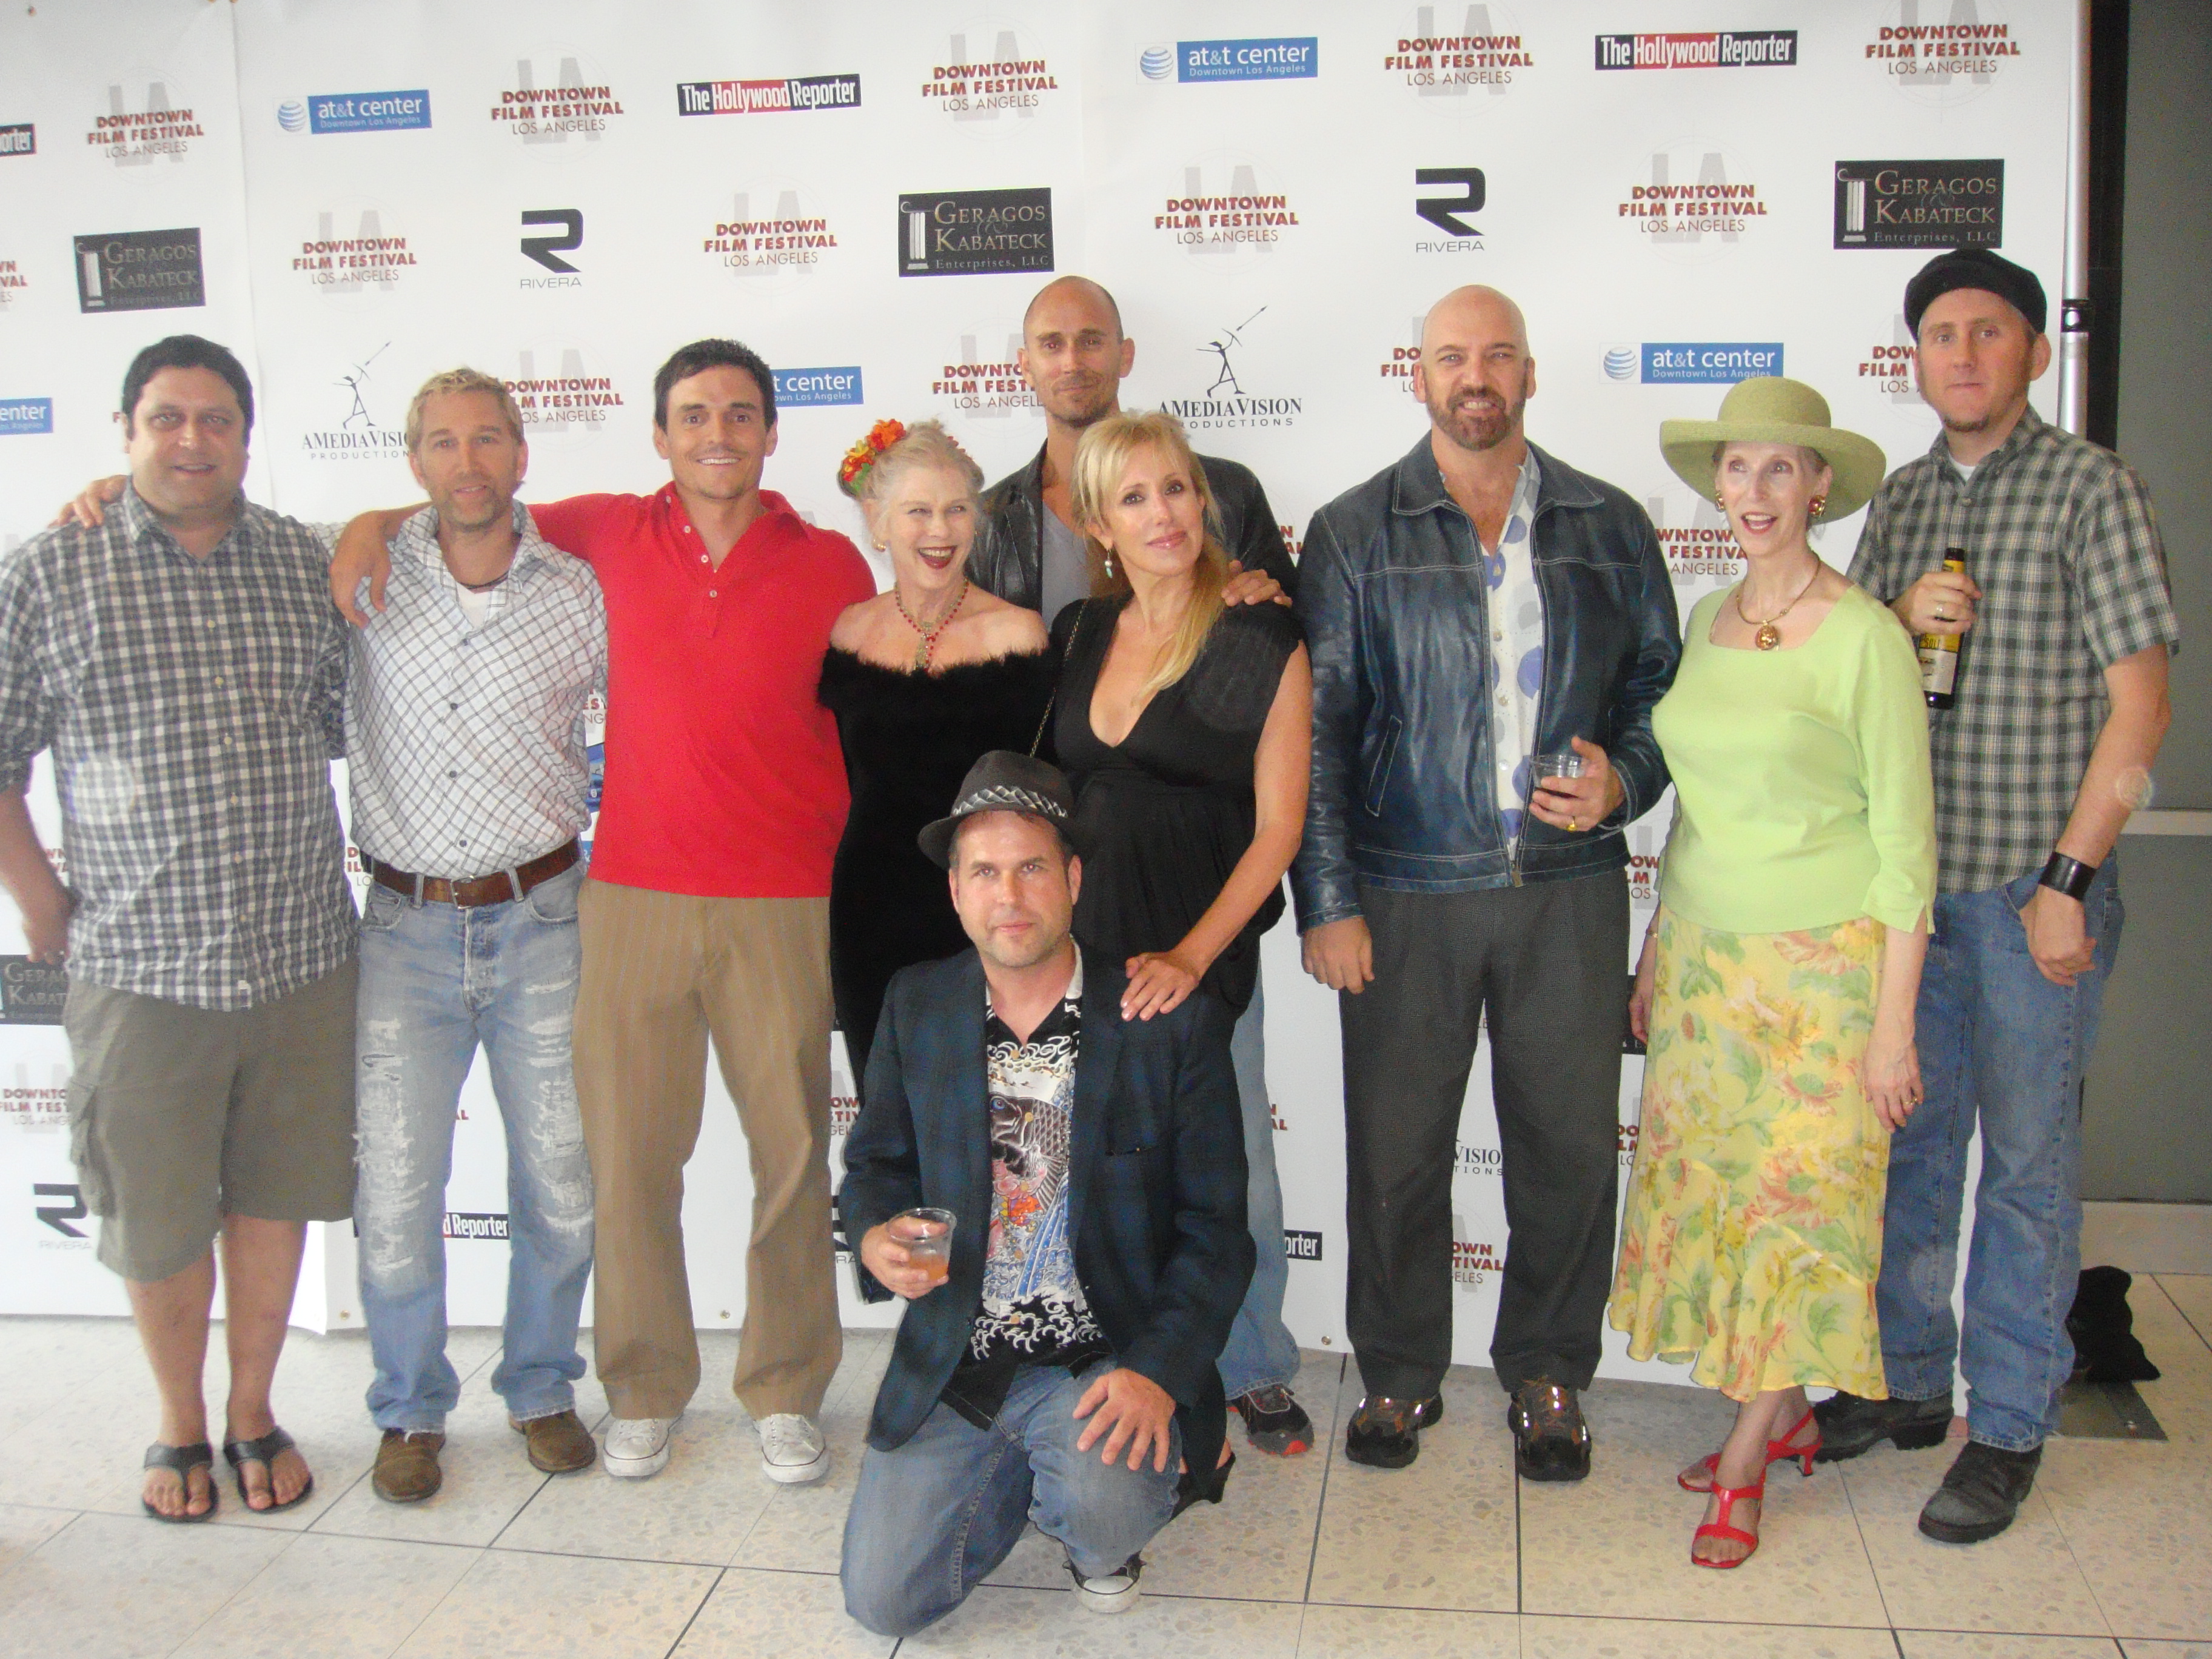 Christo Dimassis, Henry Dittman, Mews Small, and Elana Krausz at Downtown Film Festival